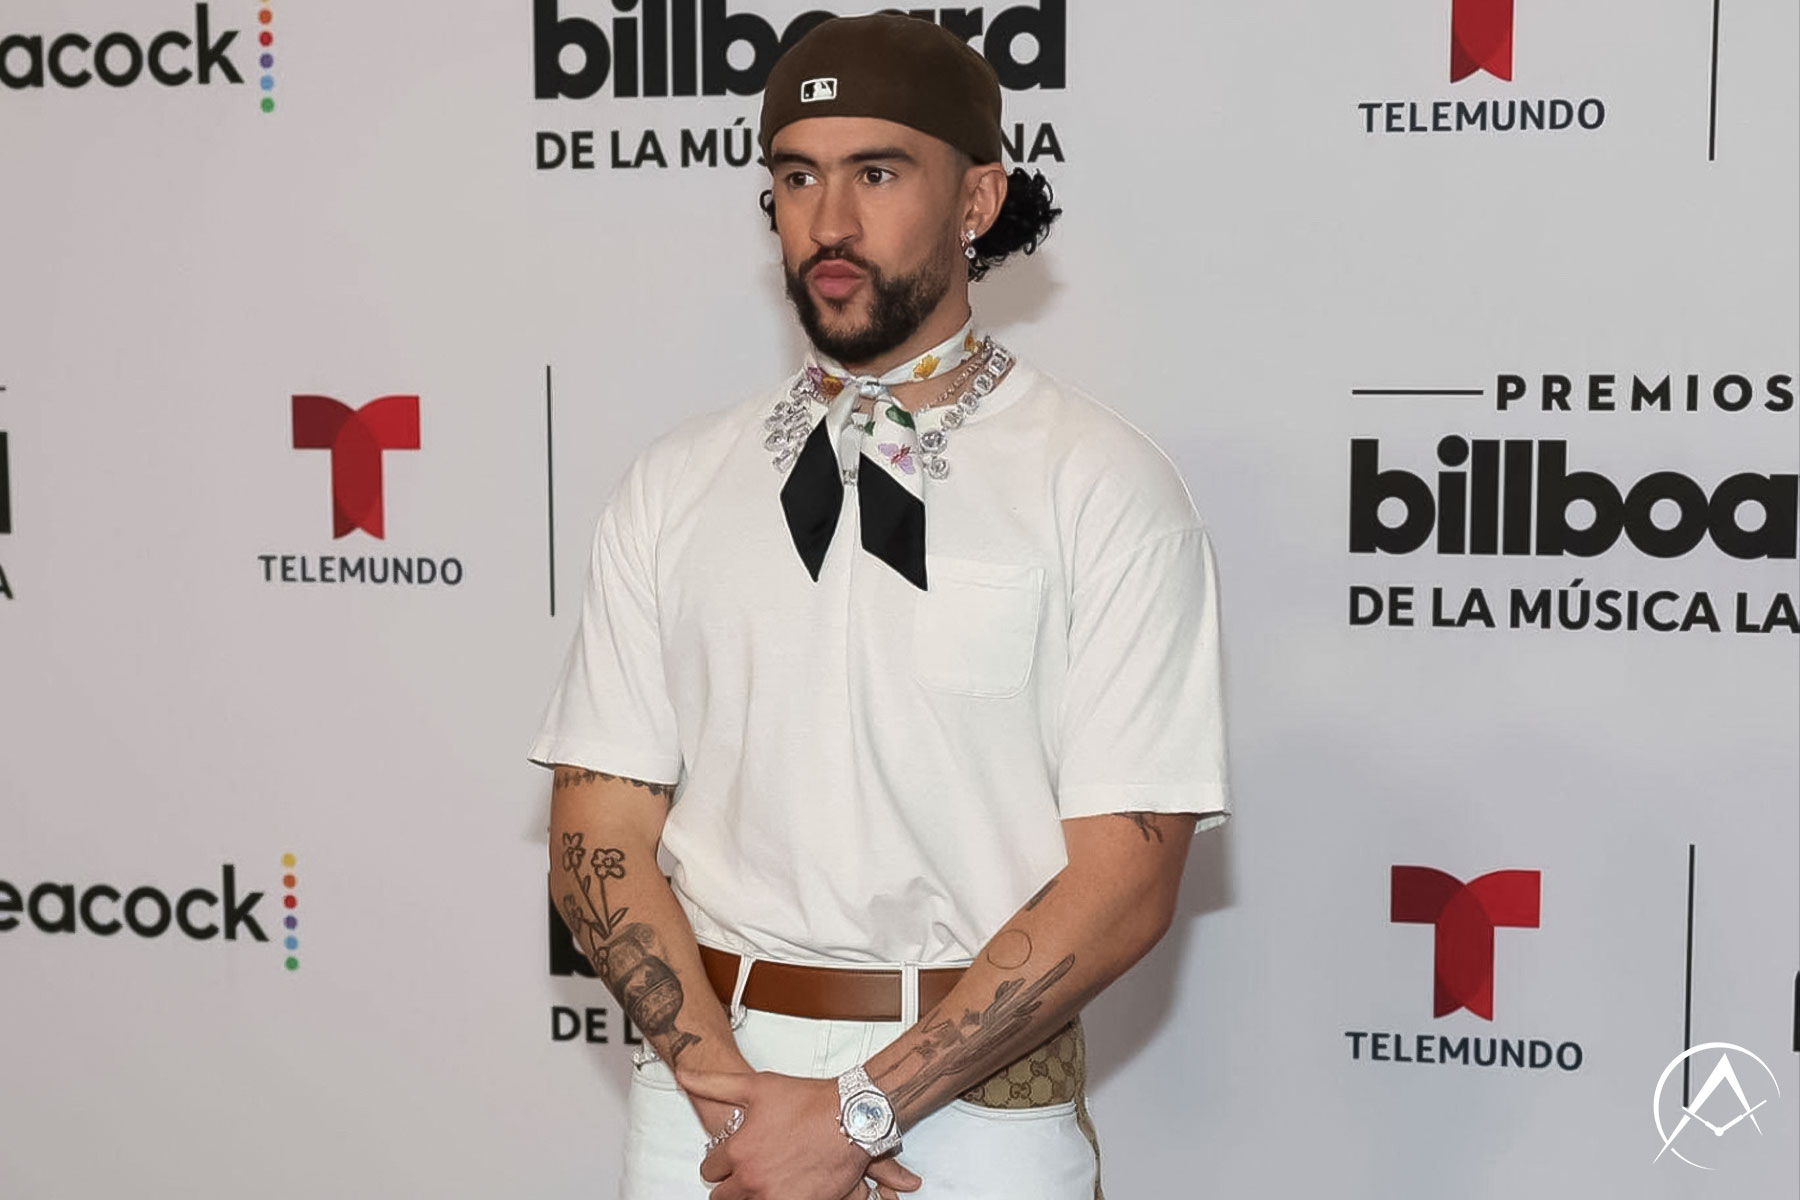 Man Wears White T-shirt, White Jeans, Gucci Belt, and Avi & Co. Diamond-Pave Jewelry at the Opening Ceremony of the Latin Music Awards.